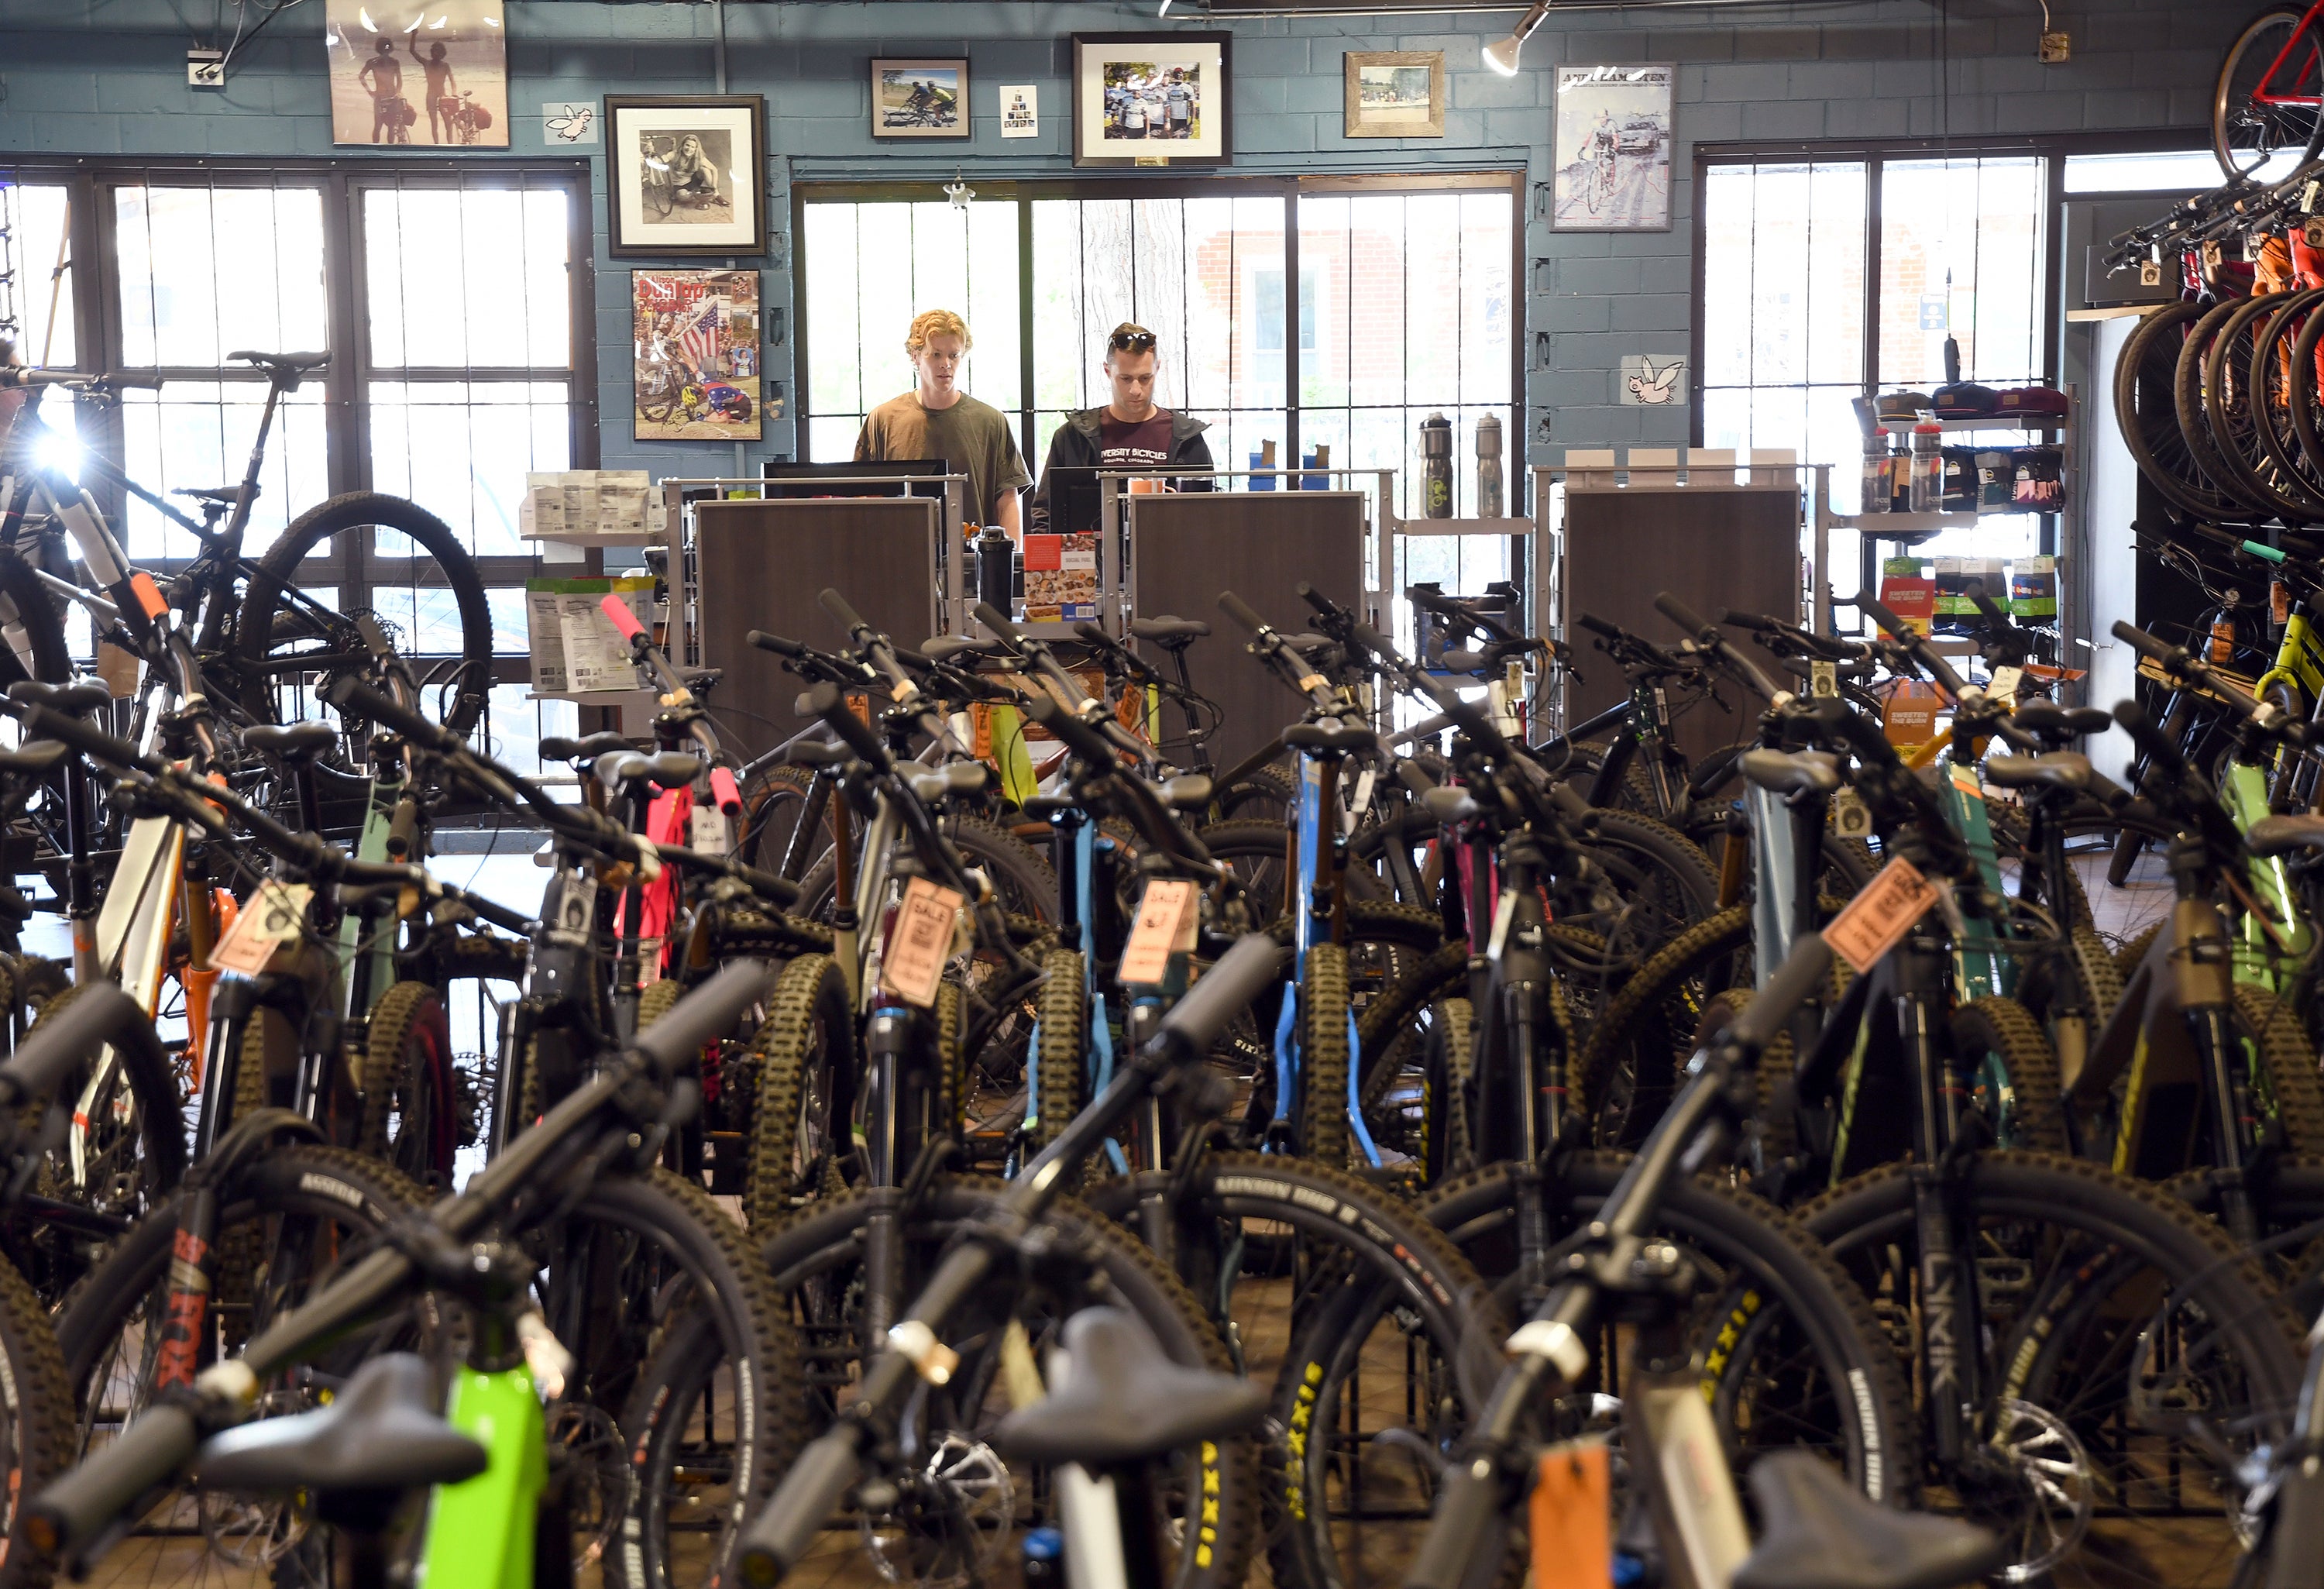 Salesmen Will Malfeld, left, and Ben Chandler, right, work at University Bicycles in Boulder